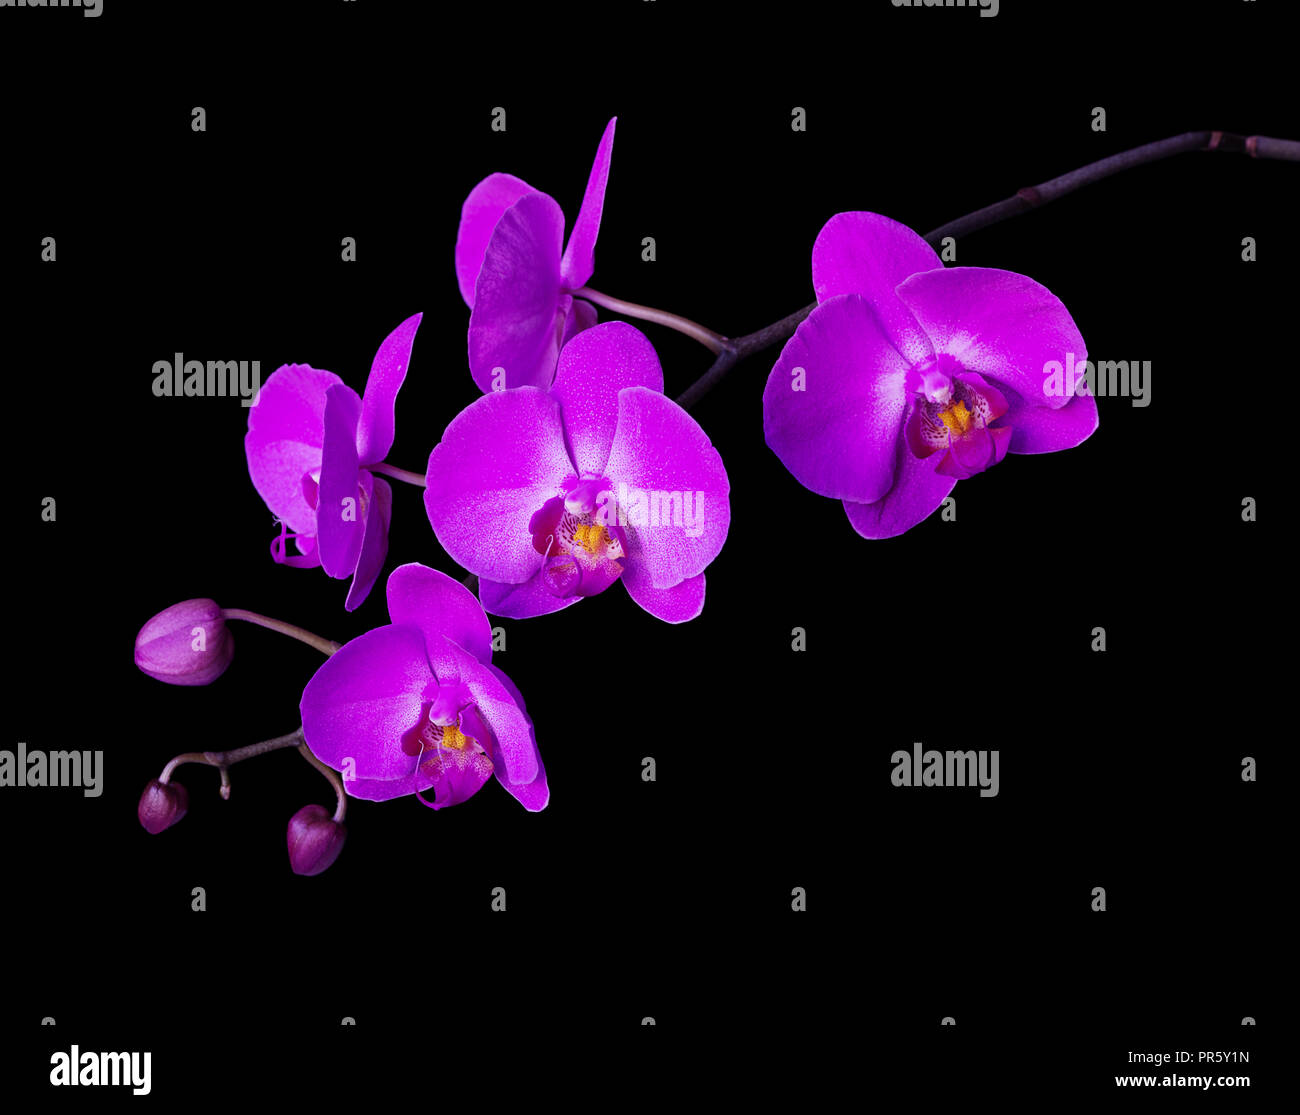 Pink flower of a phalaenopsis orchid with several buds on a branch, isolated on a black background Stock Photo